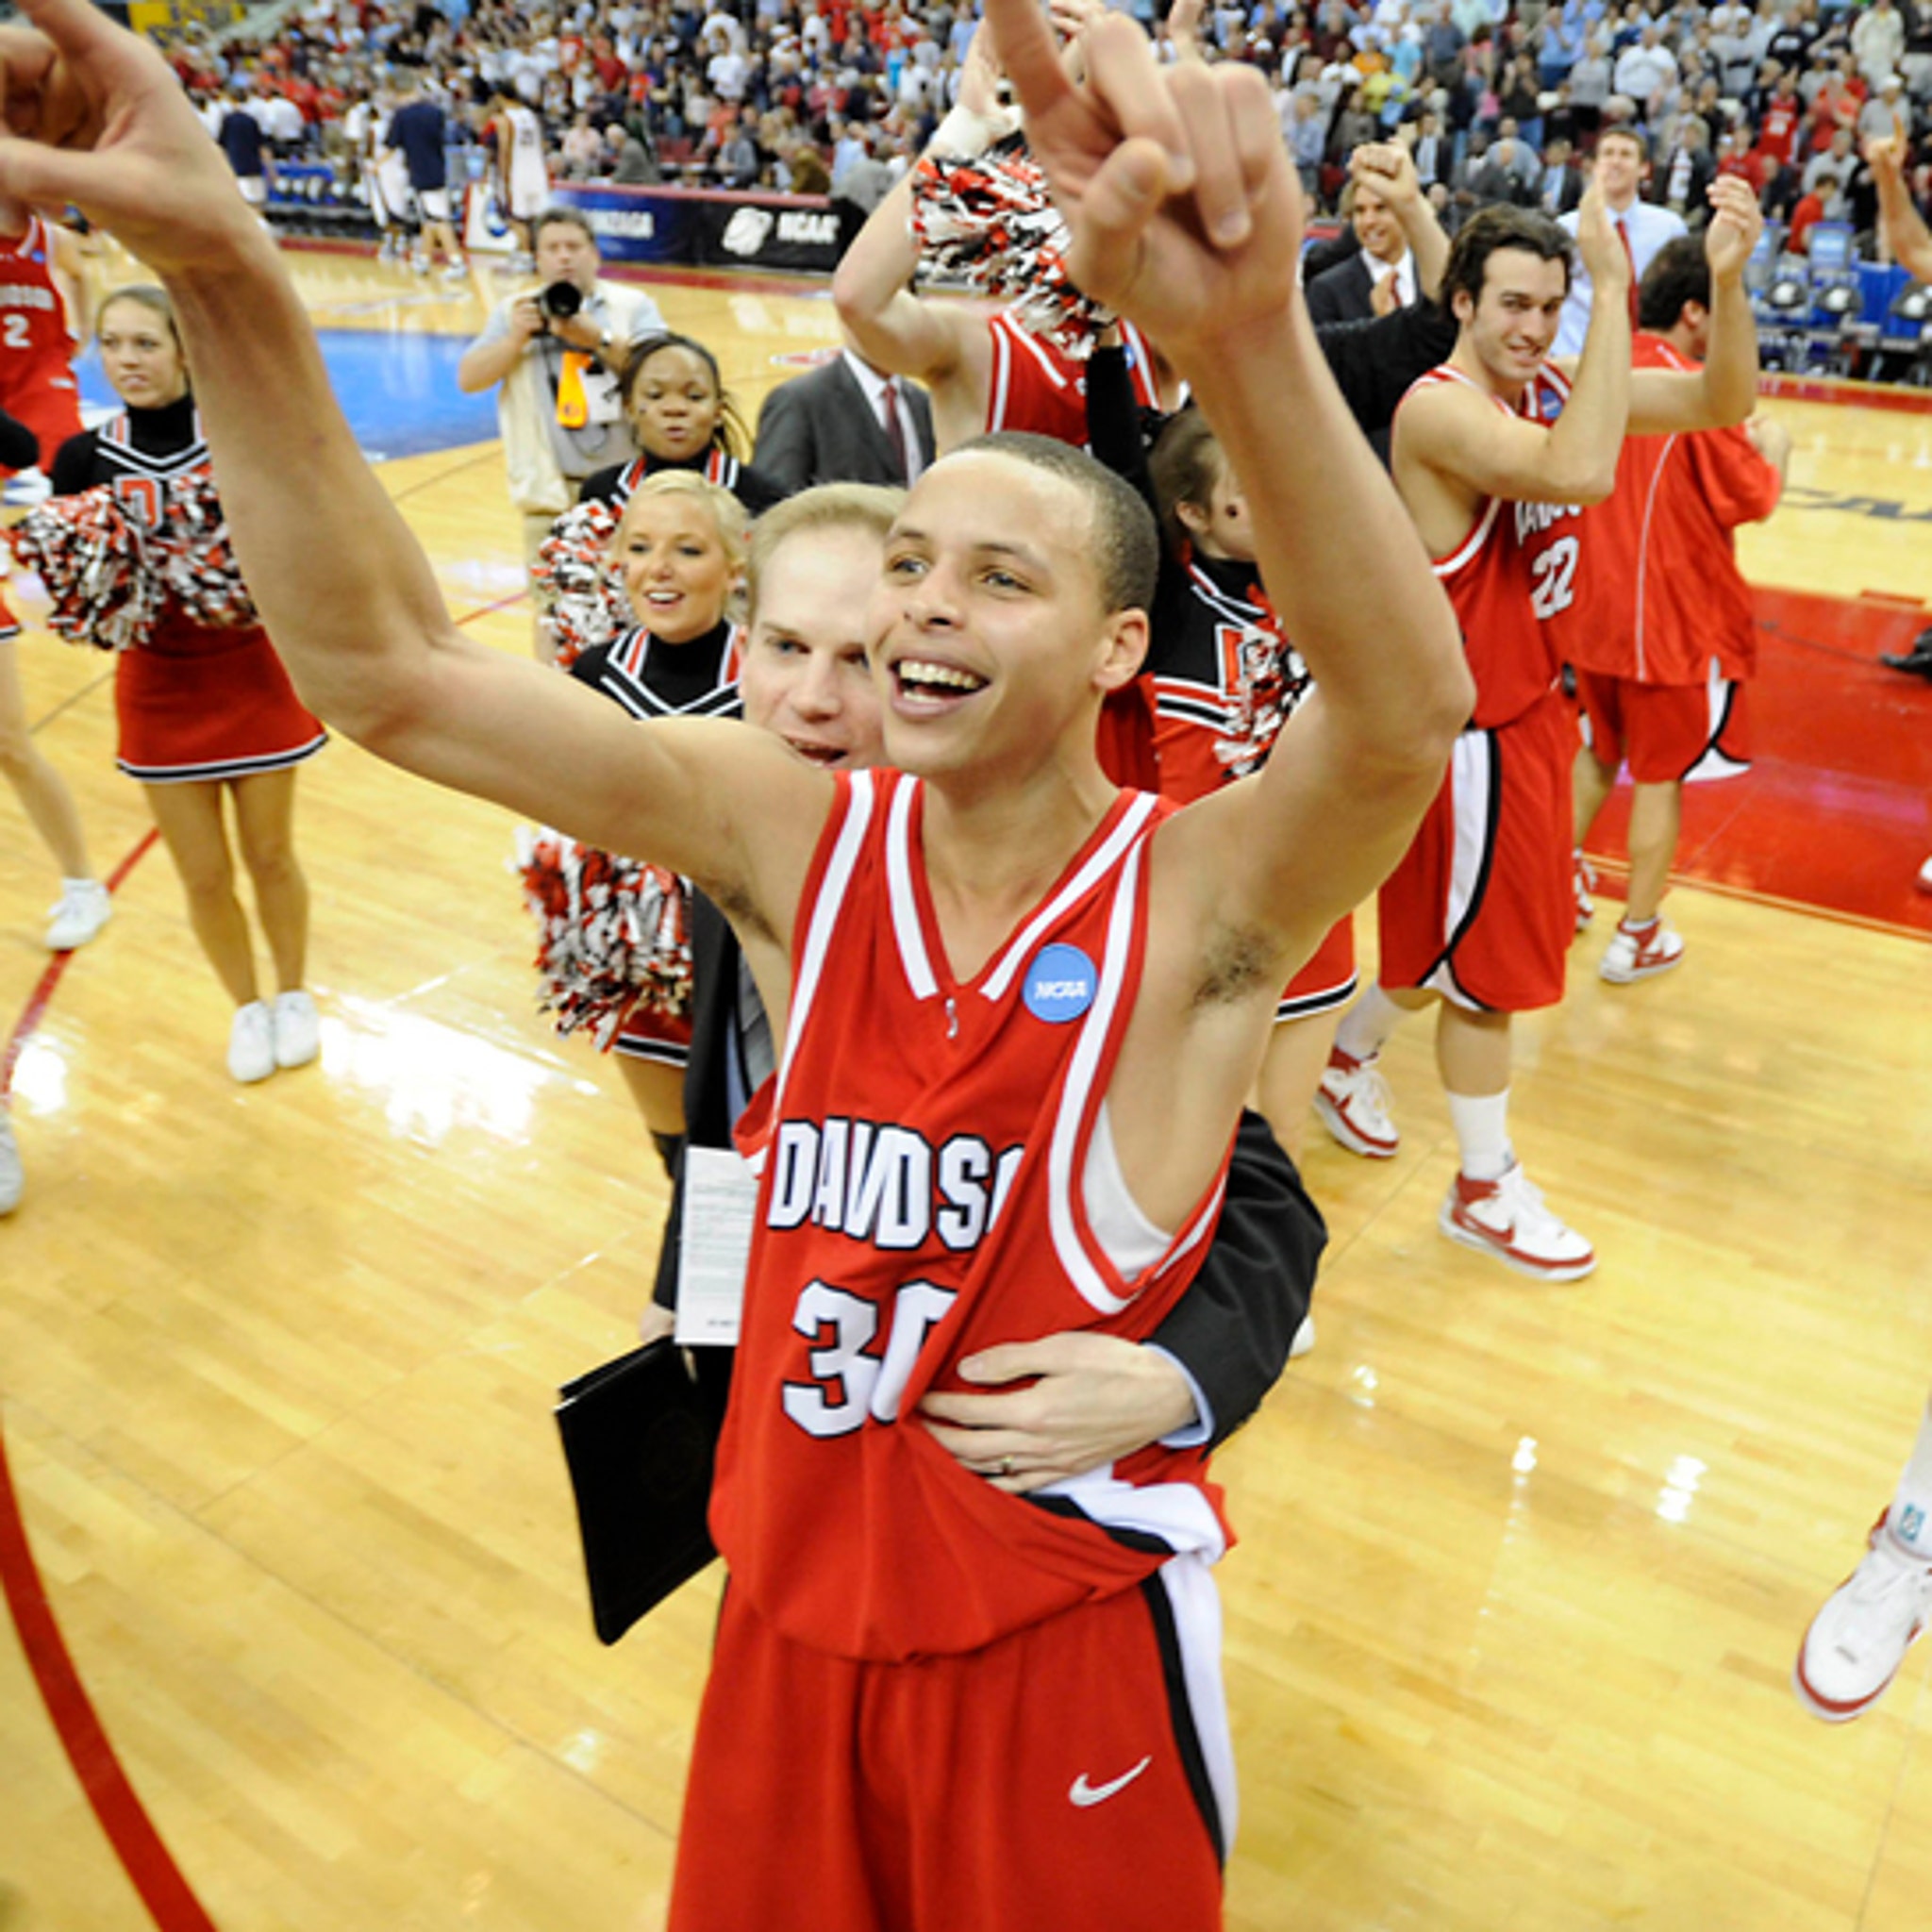 Warriors: Steph Curry excited for Davidson jersey retirement